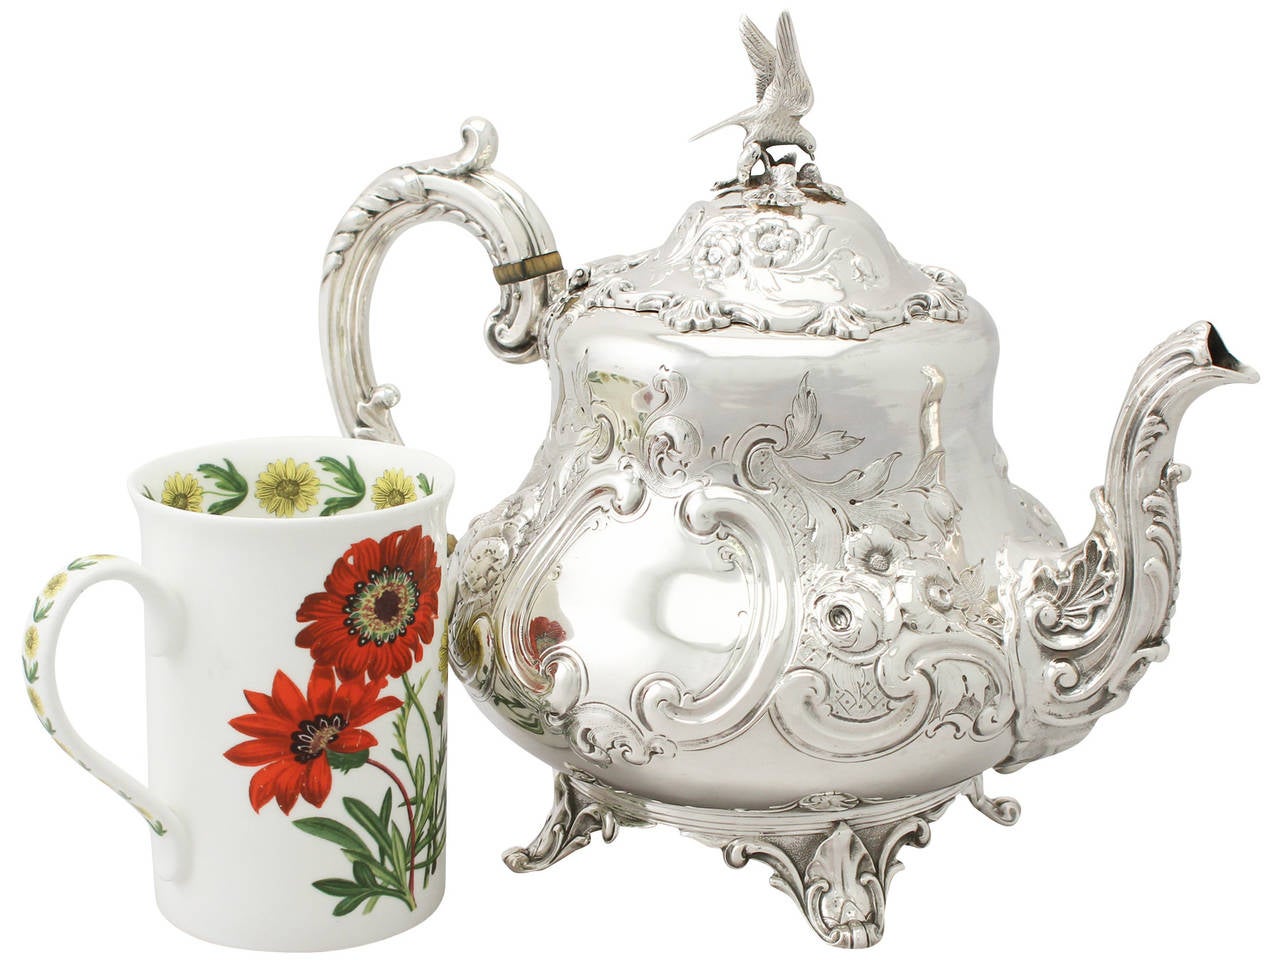 A fine and impressive antique Victorian English sterling silver teapot in the Louis style; an addition to the silver teaware collection.

This impressive antique Victorian sterling silver teapot has a baluster form in the Louis style.

The lower